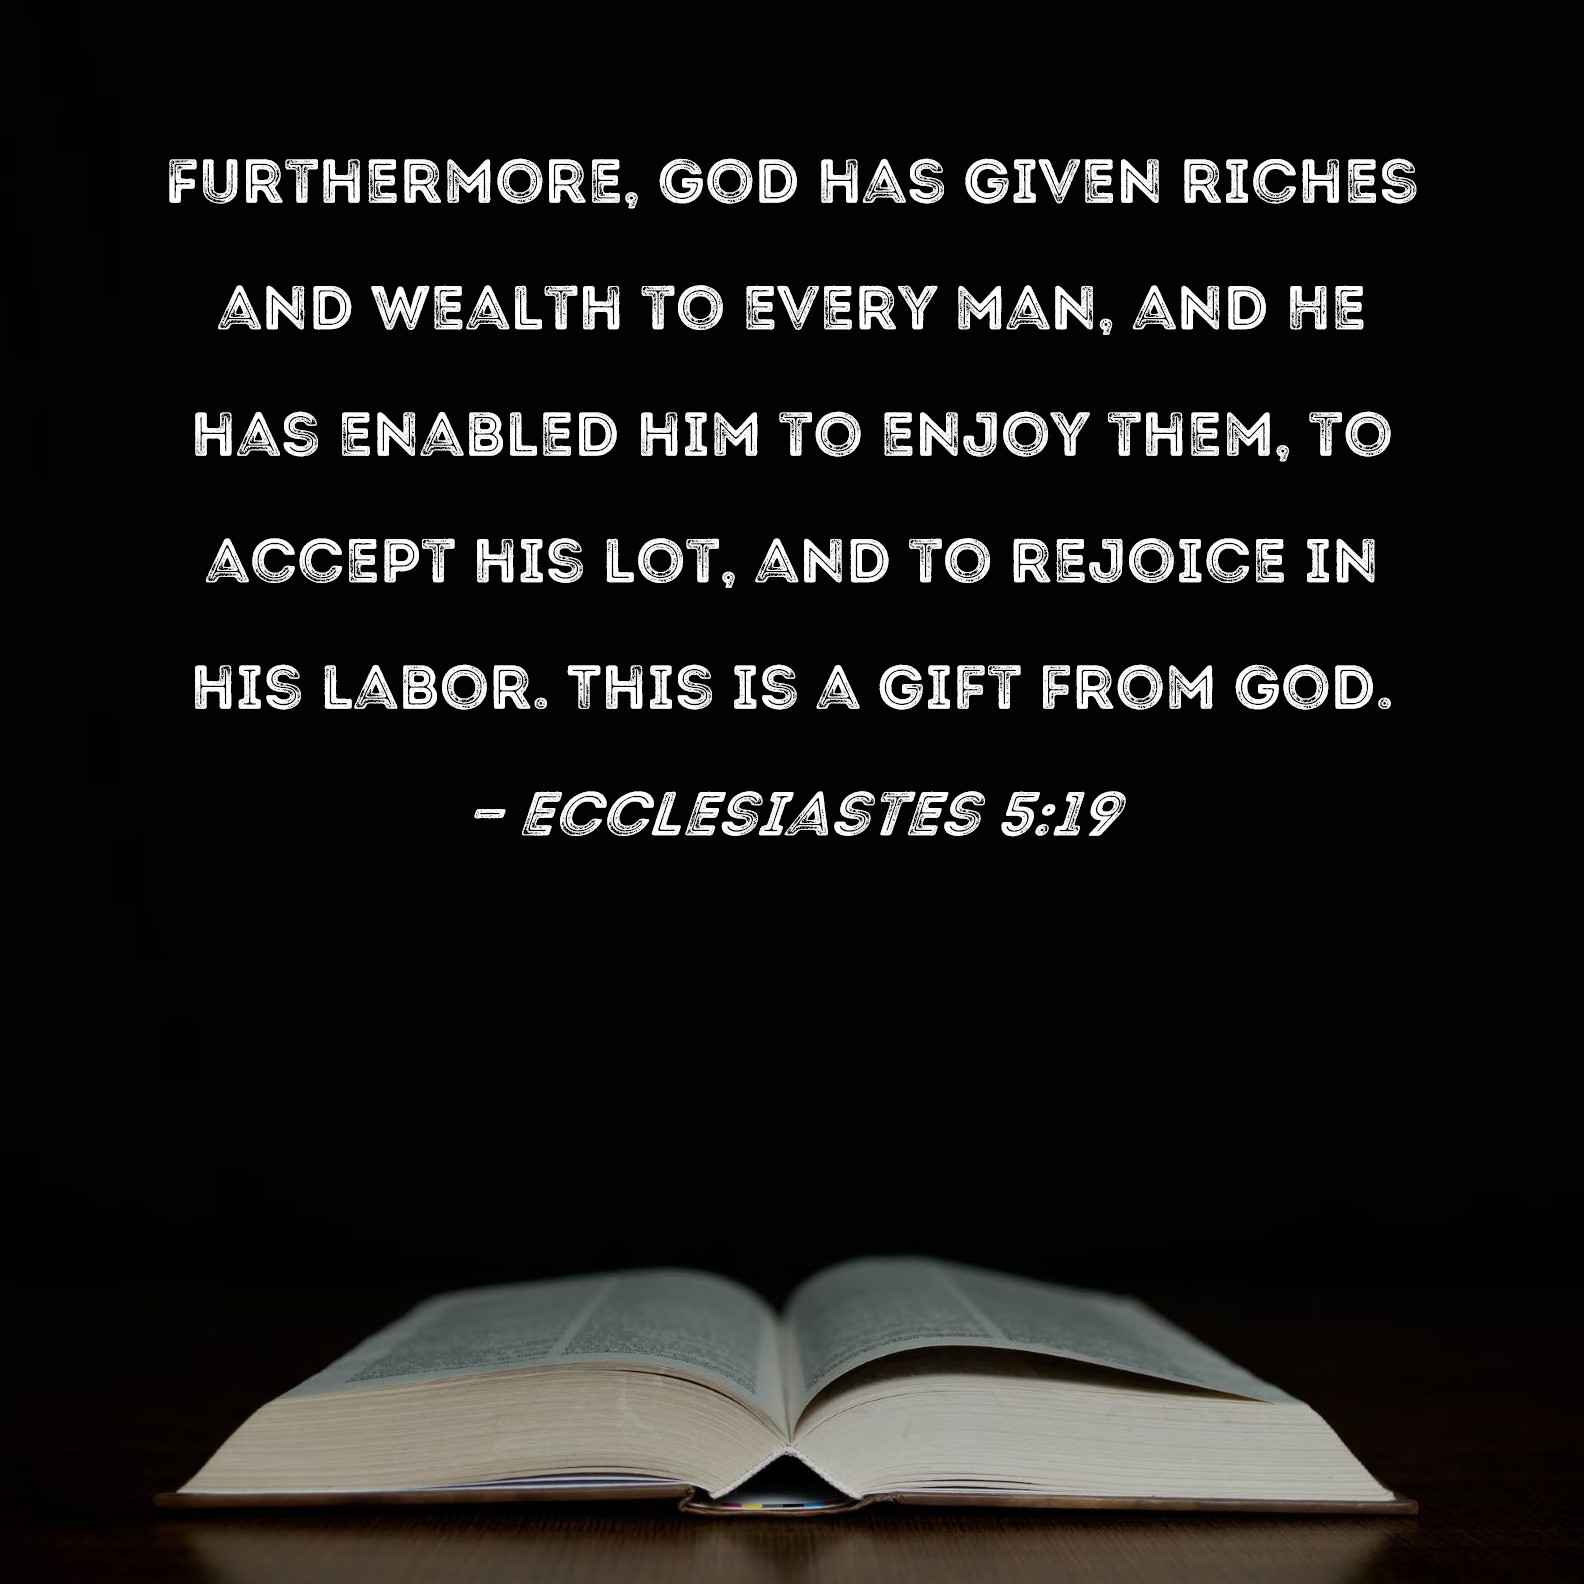 ecclesiastes-5-19-furthermore-god-has-given-riches-and-wealth-to-every